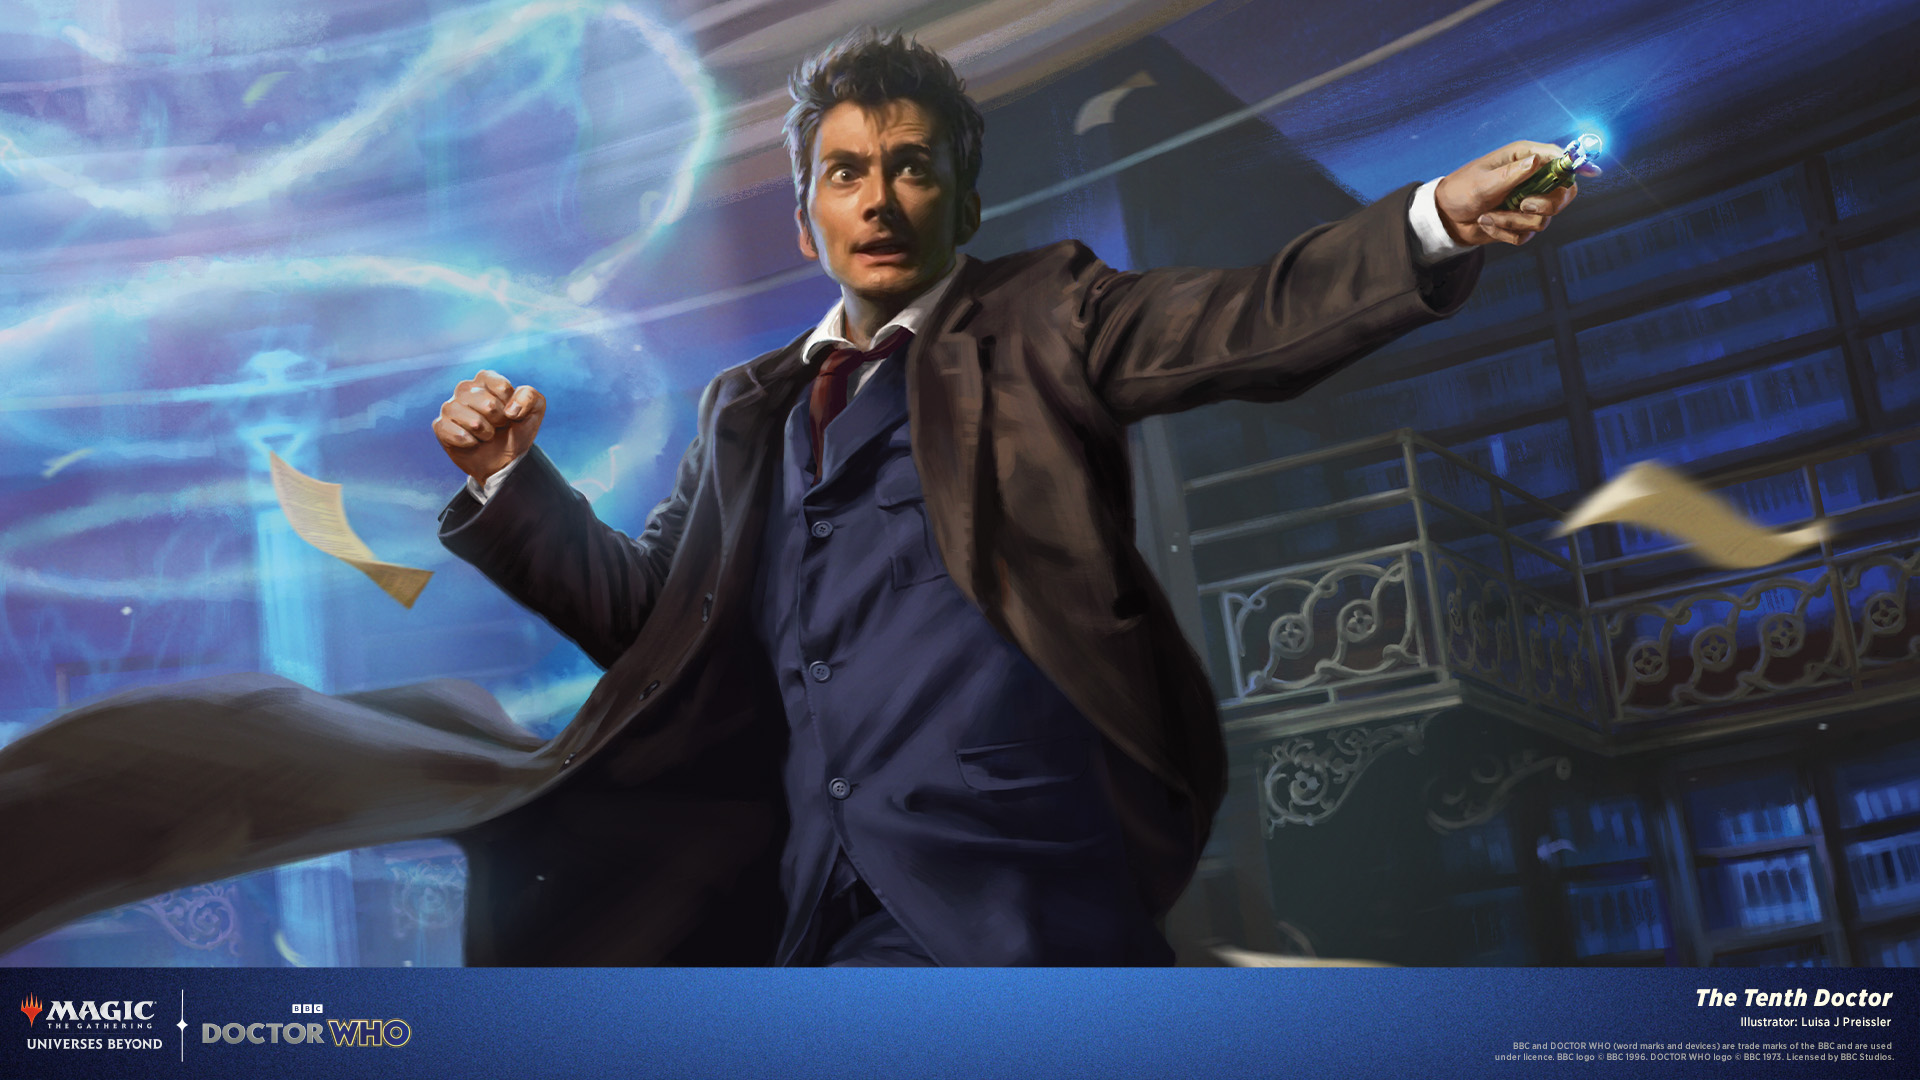 Kate Stewart, Bill Potts, And More Legendary Creatures Debut In Wednesday’s MTG Doctor Who Previews